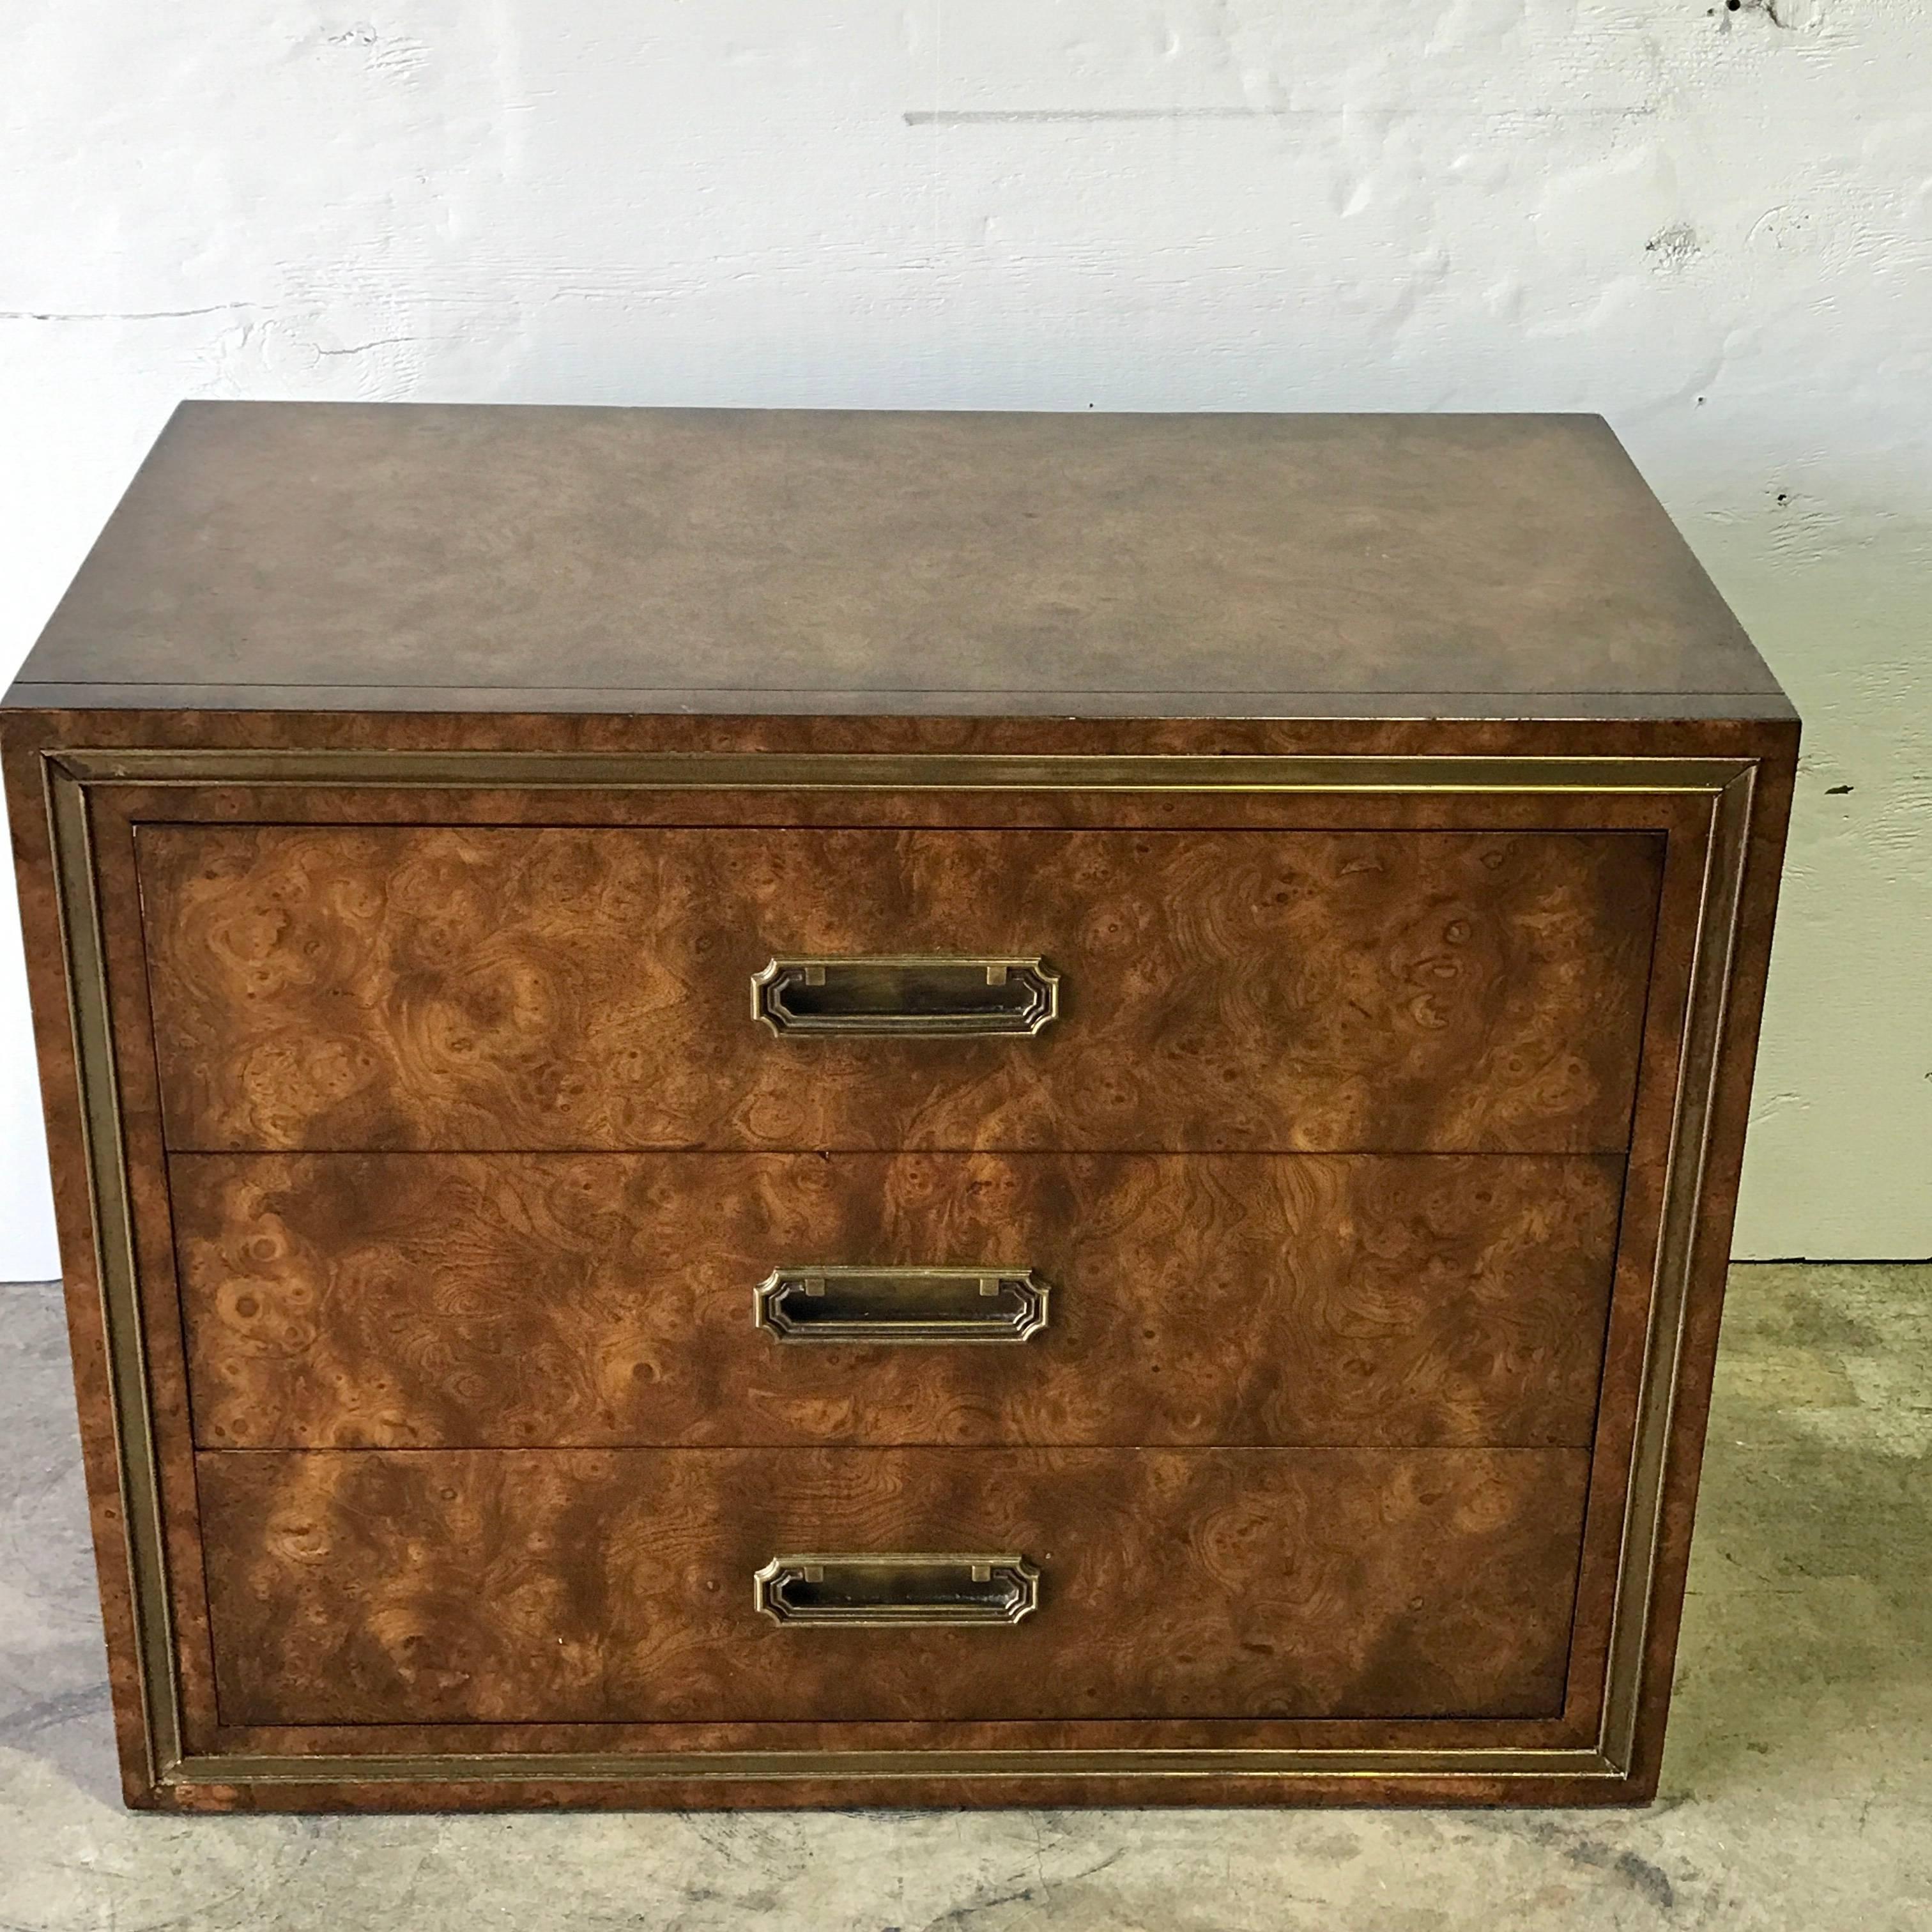 Pair of Mastercraft burl and brass chests or nightstands, by Bernhard Rhone, each one fitted with three 28.5